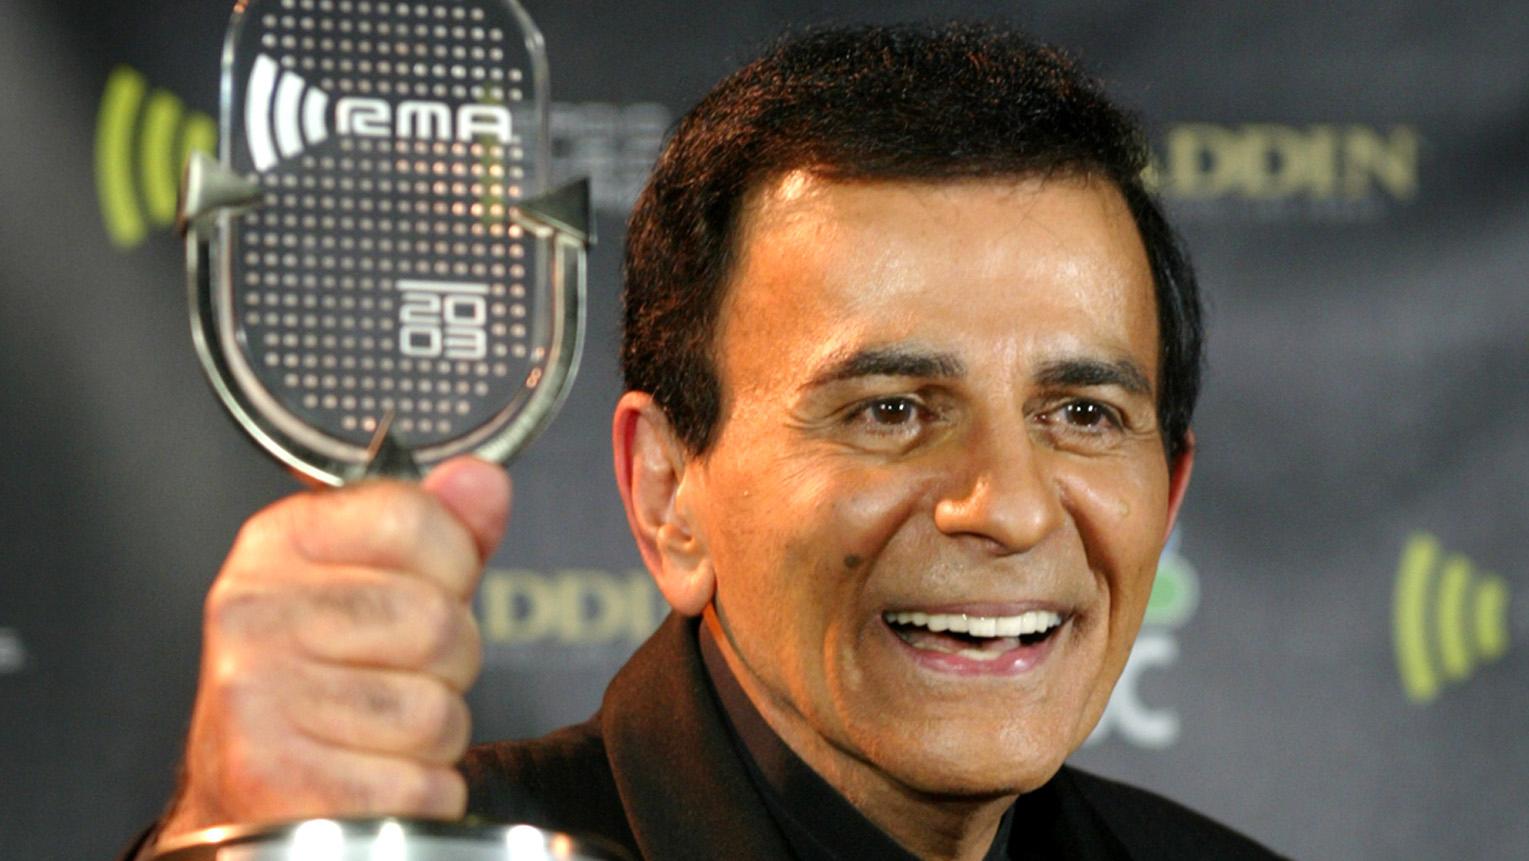 Casey Kasem poses with his Radio Icon Award at the 2003 Radio Music Awards, at the Aladdin Theatre for the Performing Arts in Las Vegas, Nevada, October 27, 2003.